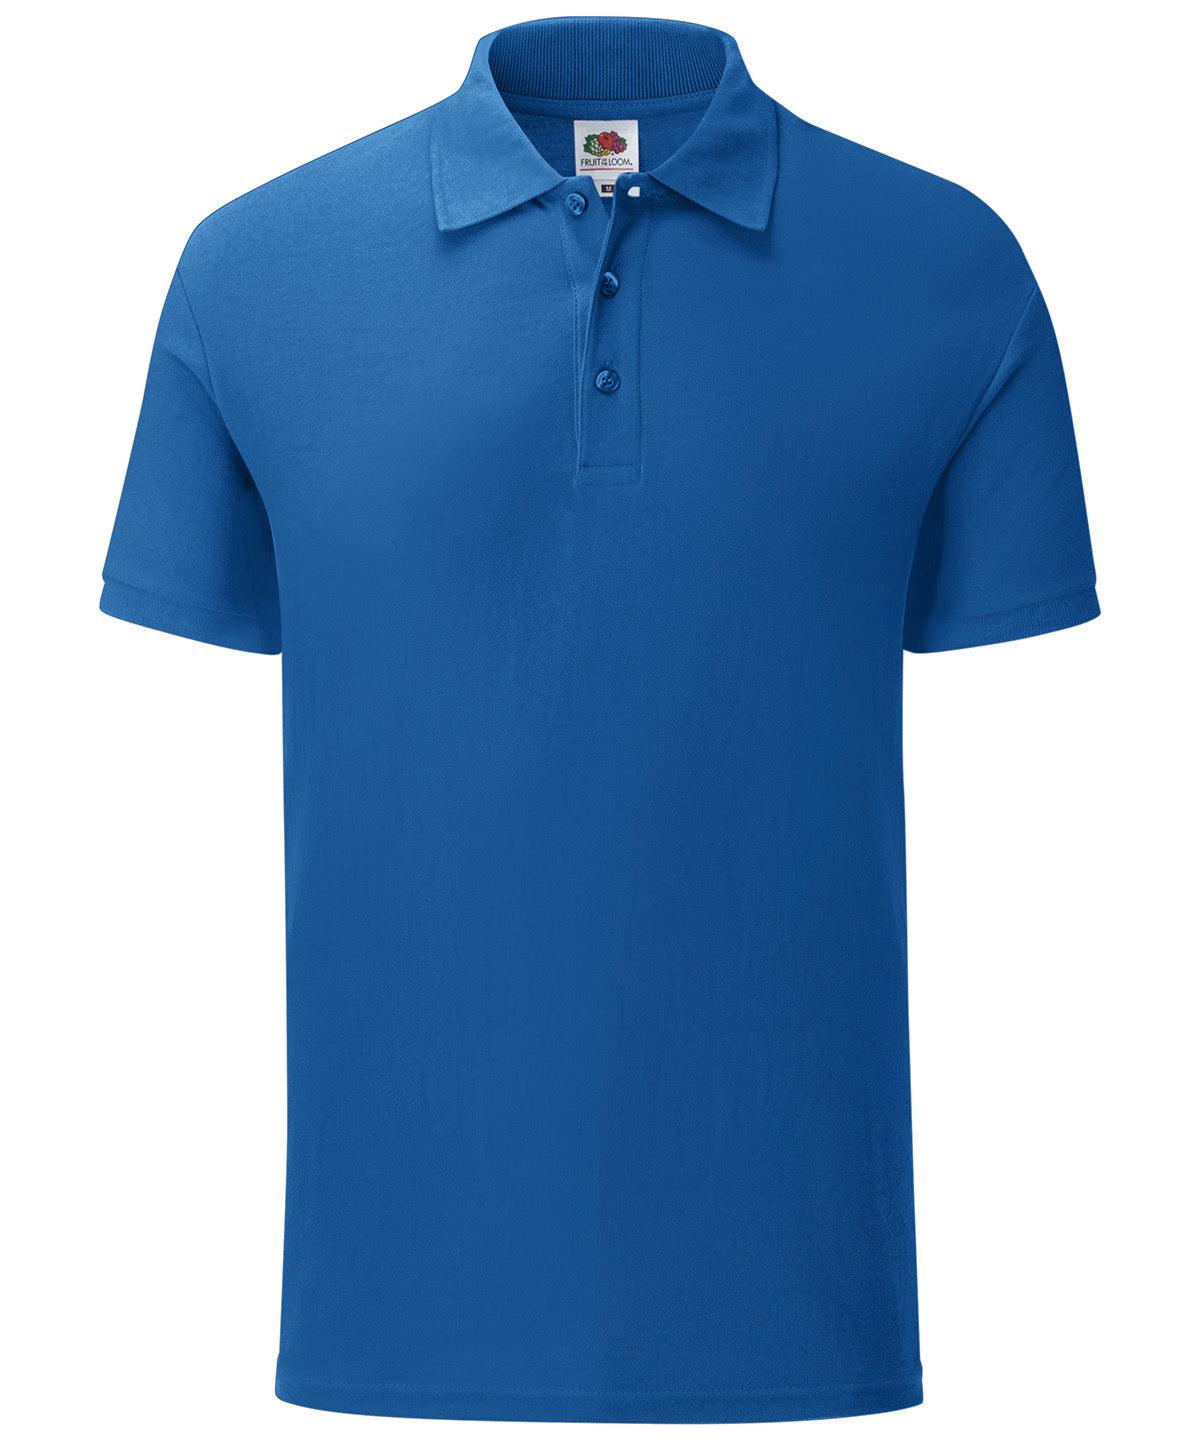 Royal Blue - Iconic polo Polos Fruit of the Loom Plus Sizes, Polos & Casual, Raladeal - Recently Added, Rebrandable Schoolwear Centres